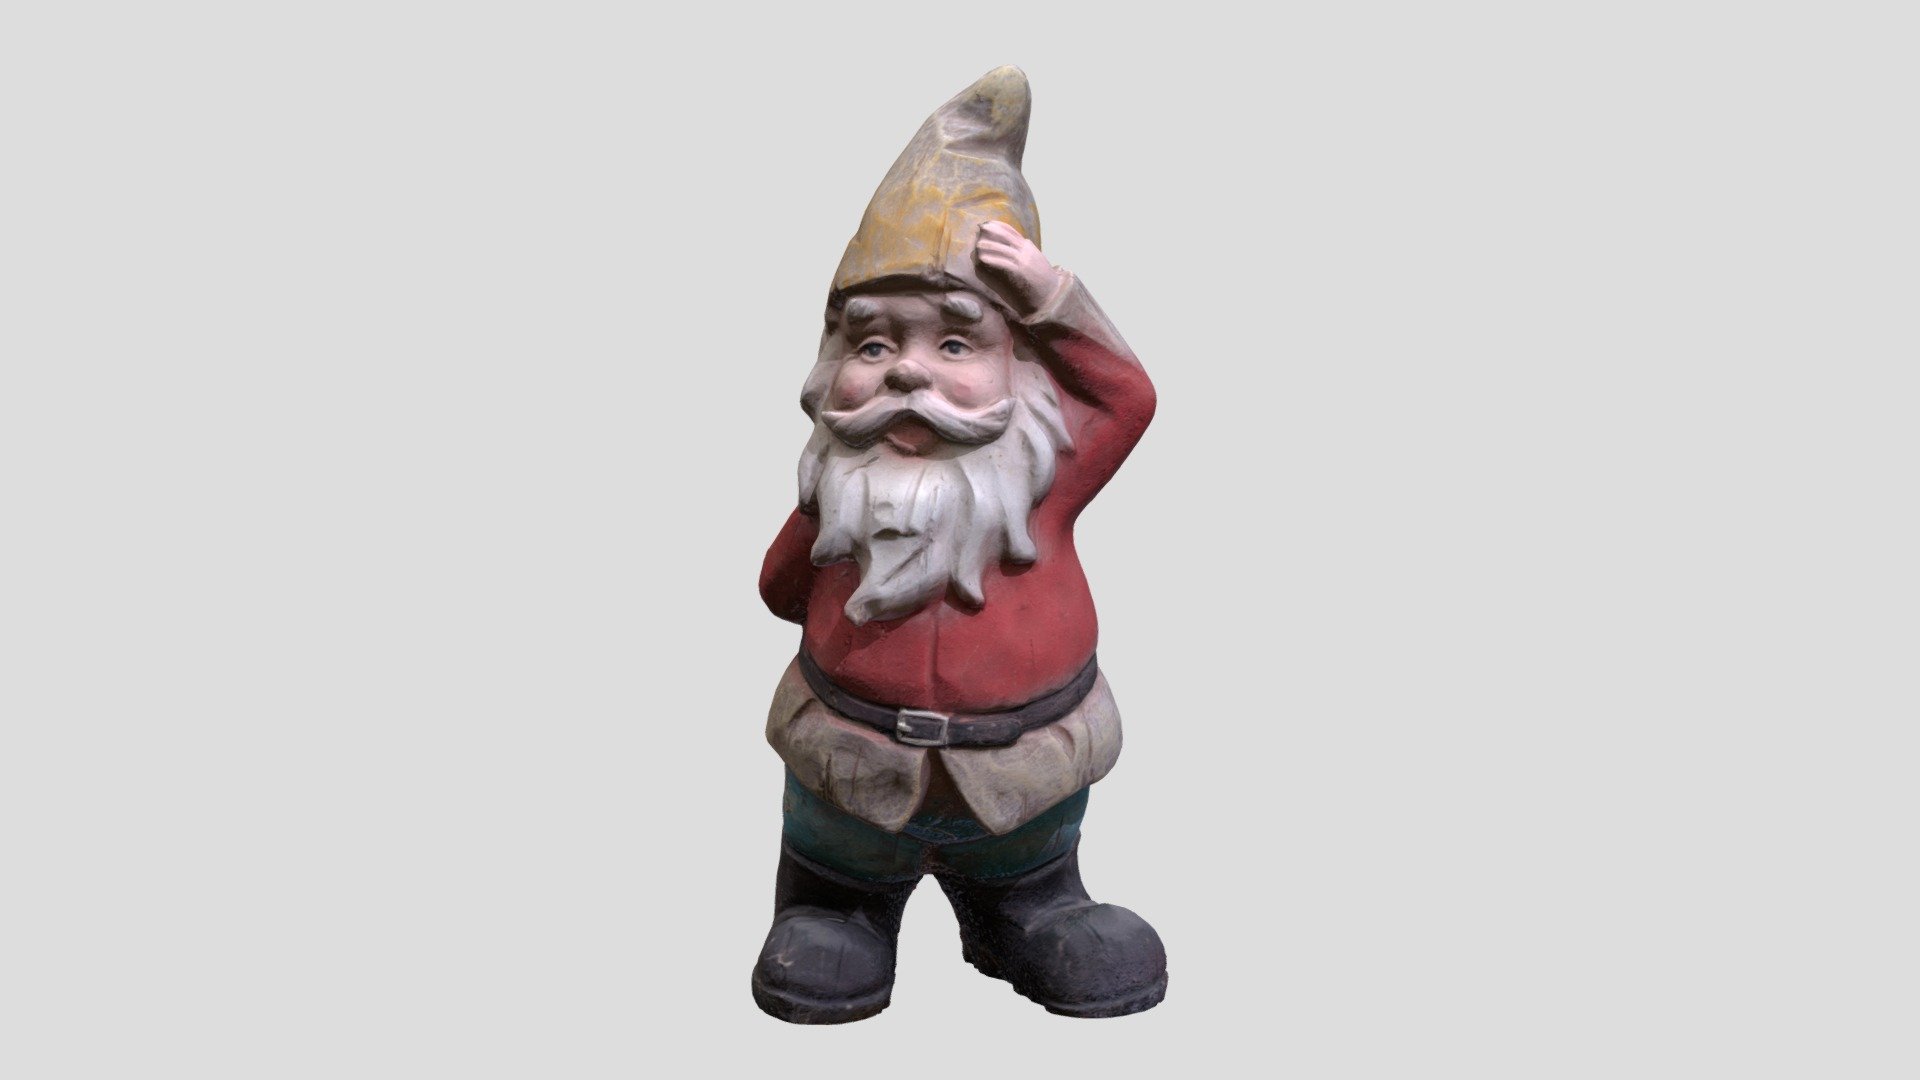 Photogrammetry capture of a garden gnome that was made from china but given the appearing of wood. Fully textures from the photo scan including normals. The model has been cleaned up and decimated to a resonable size and the underside of the feet have been artifically flattened. 4K high res textures make the model great for high resolution renders or games 3d model